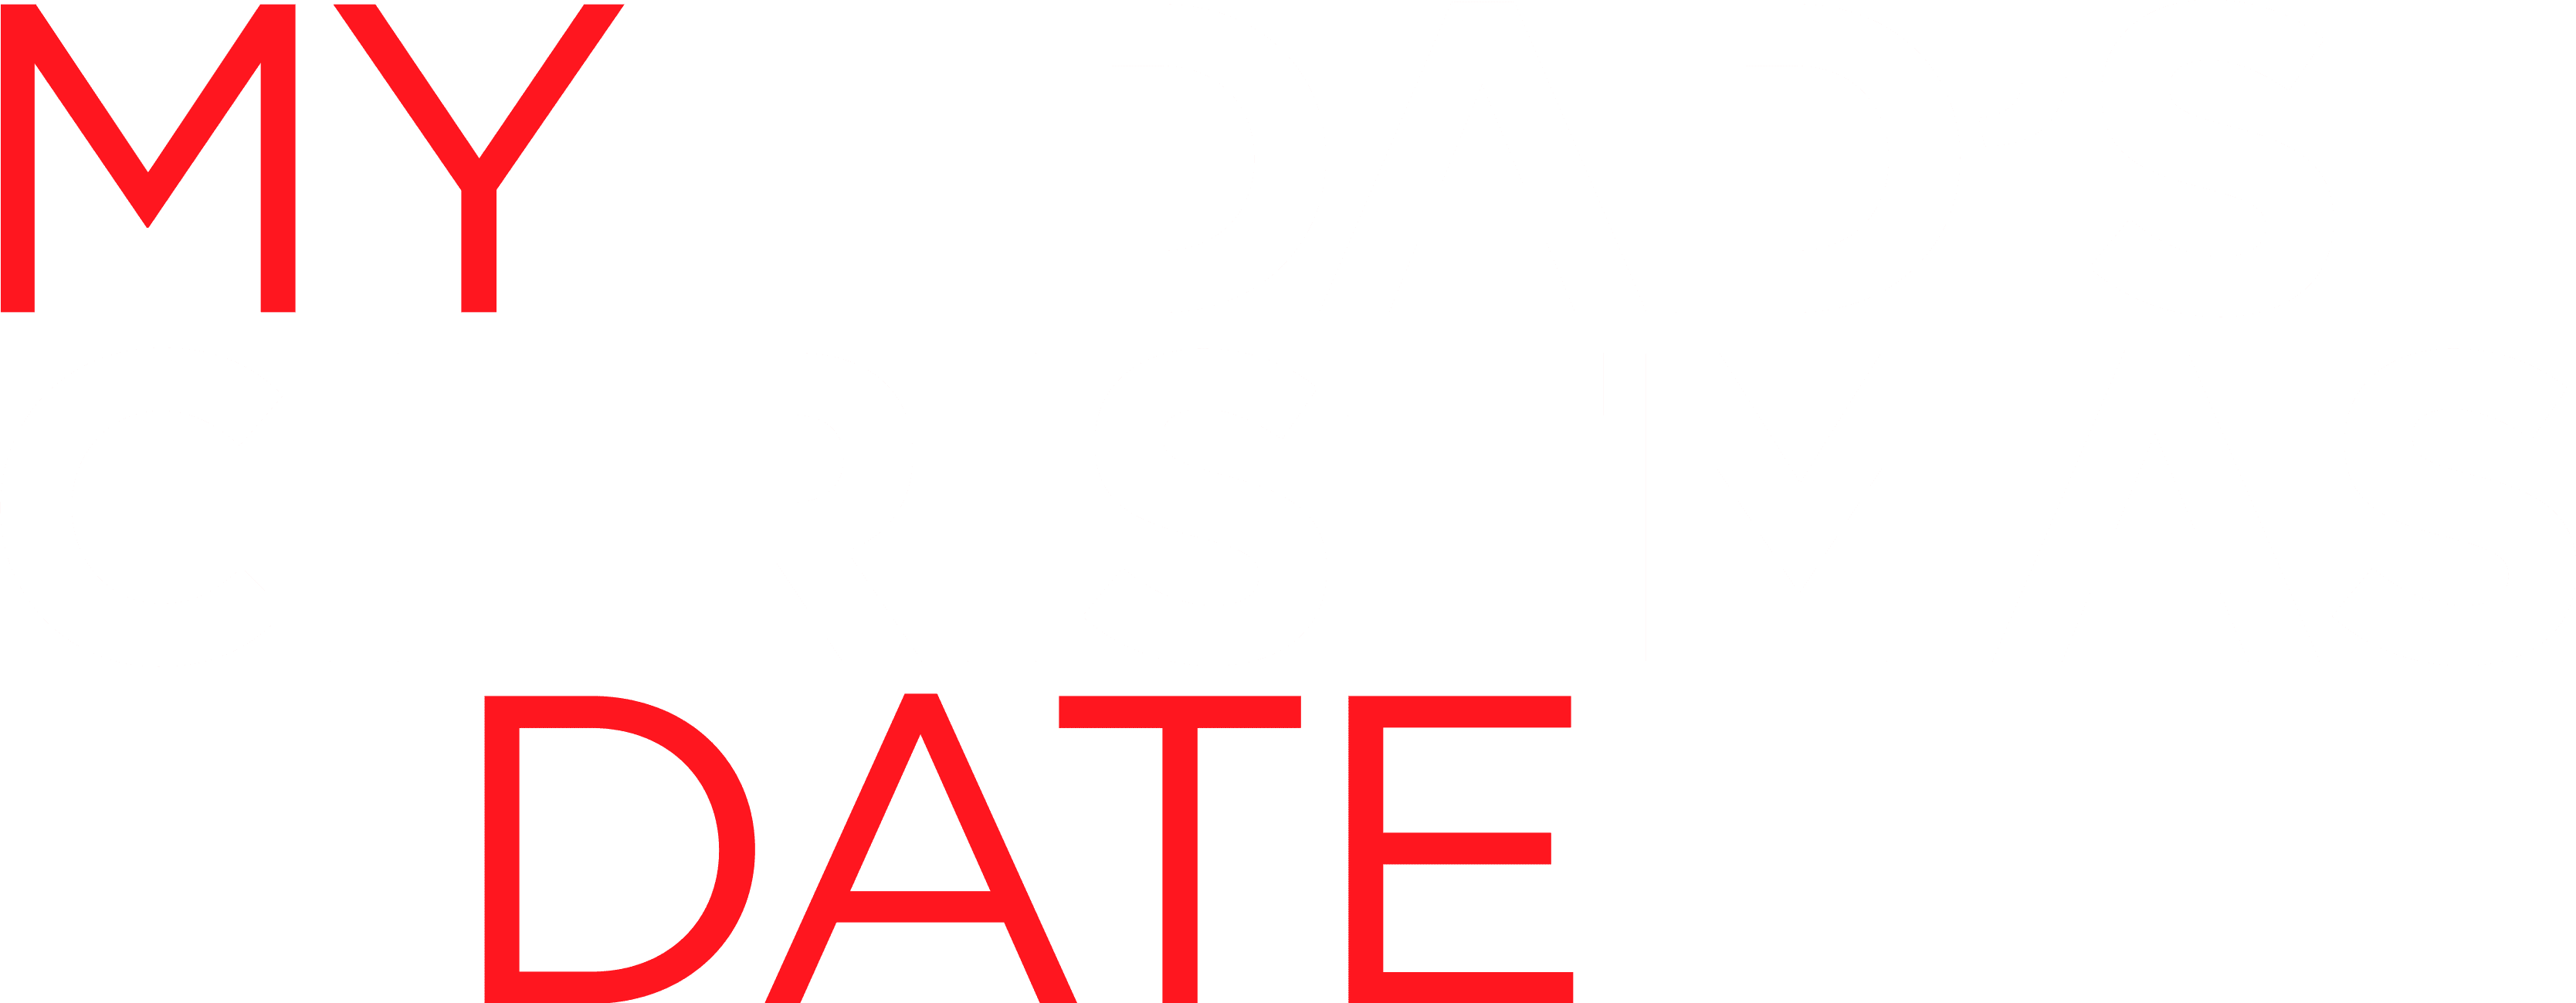 My Dad's Christmas Date logo